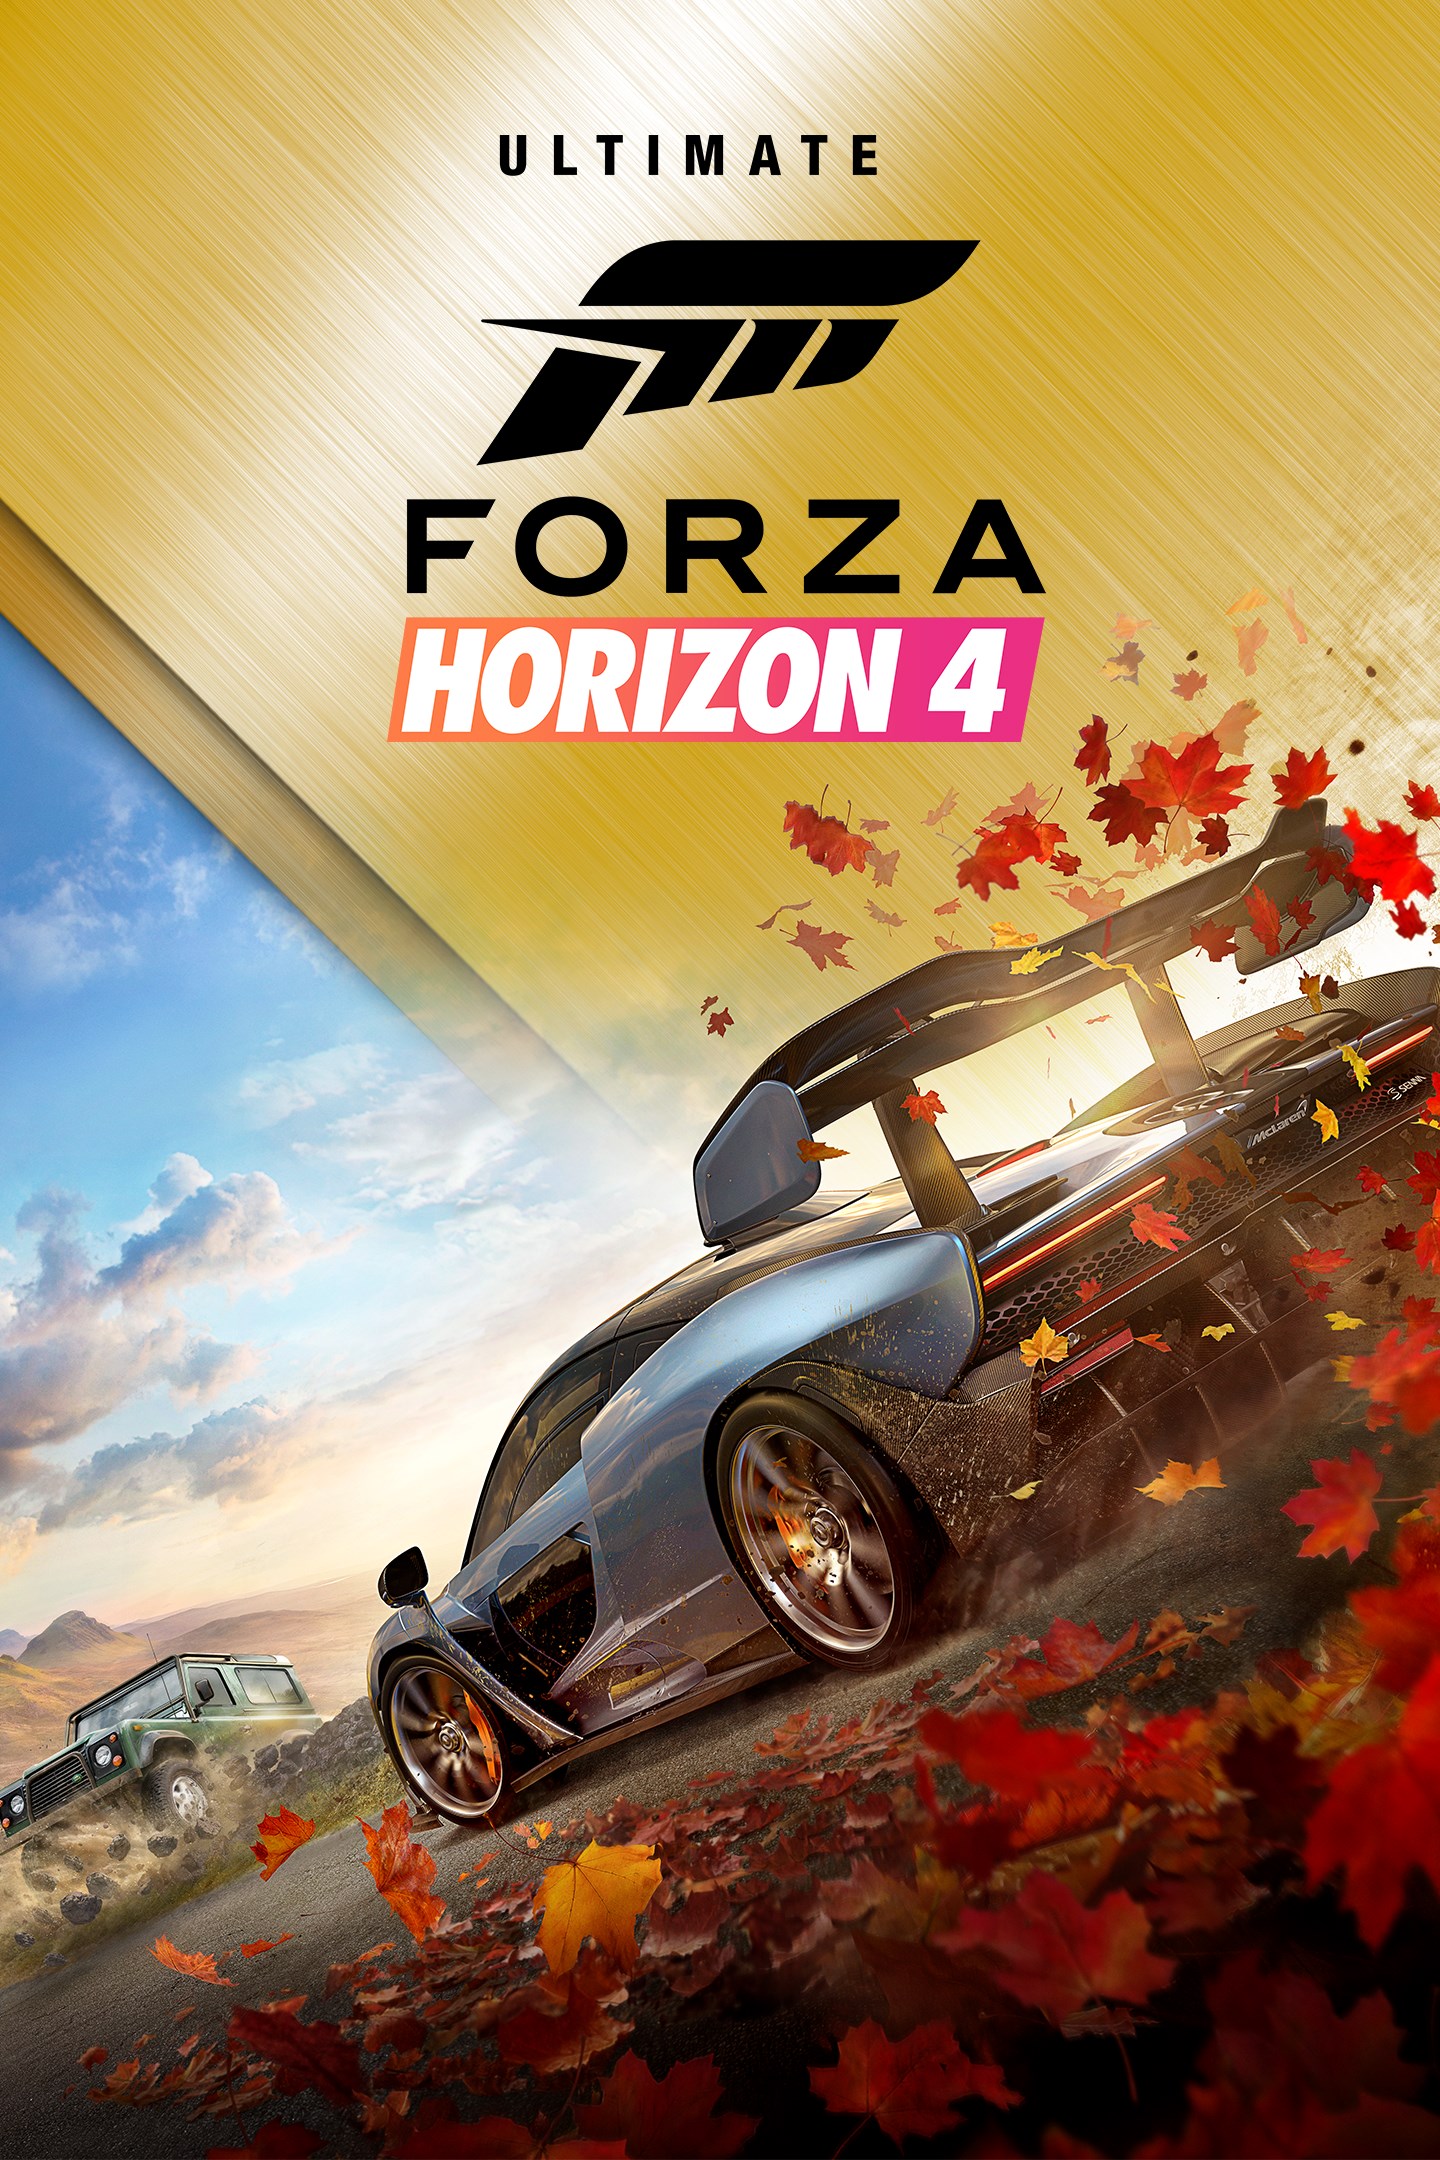 does forza horizon 4 ultimate edition come with all dlc